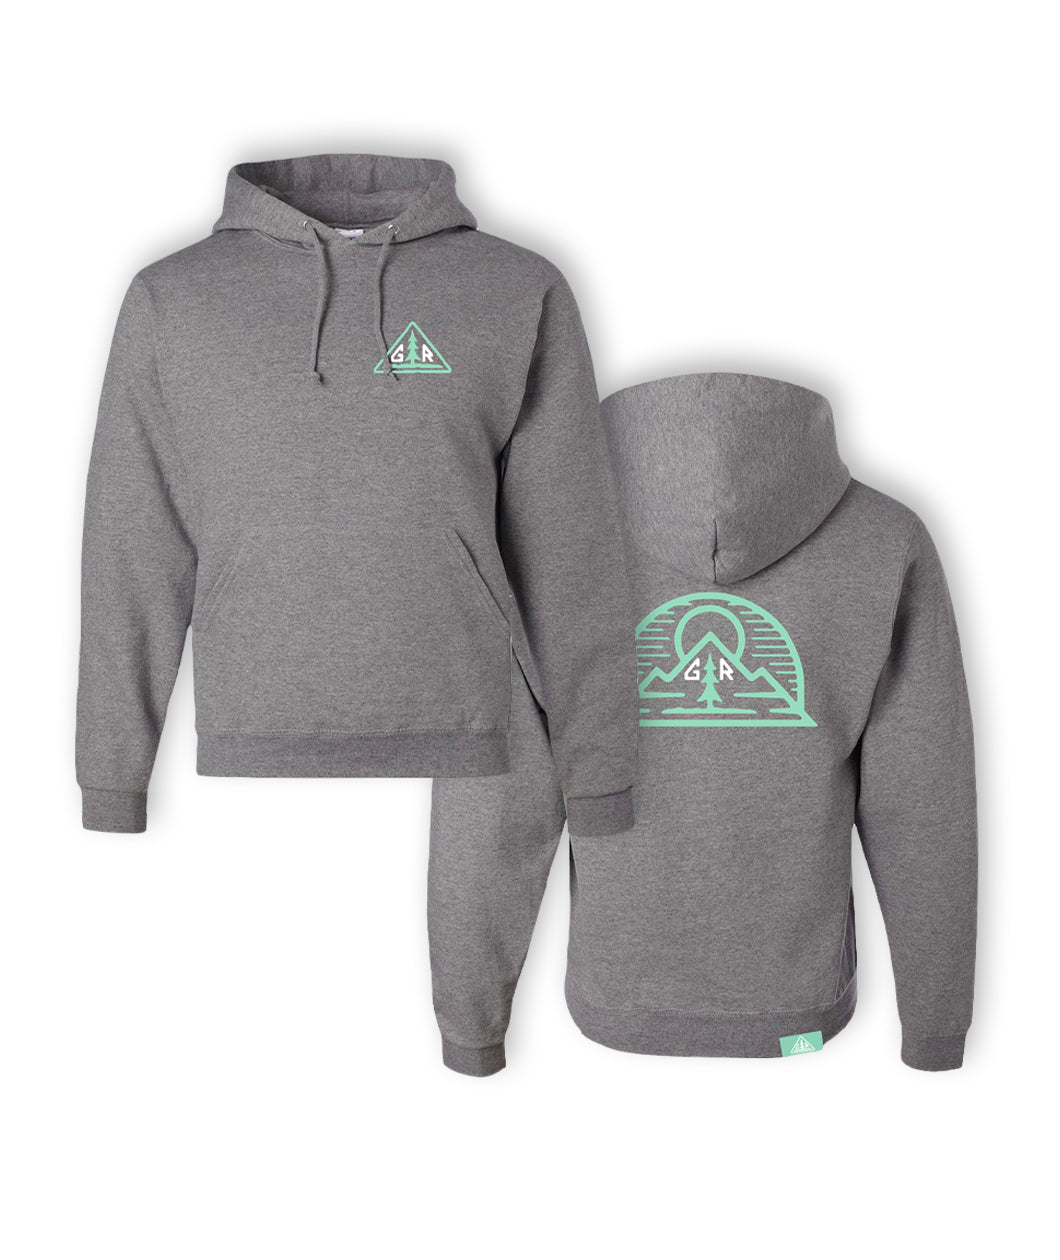 A gray hoodie with a green outline triangle surrounding a green tree. On the left side of the tree is a “G” and on the right is “R” both in white. On the back is a green outline vector drawing of a sun rising above a mountain with a half circle around both. “G” and “R” are in white on either side of a green tree - from the Ginger Runner